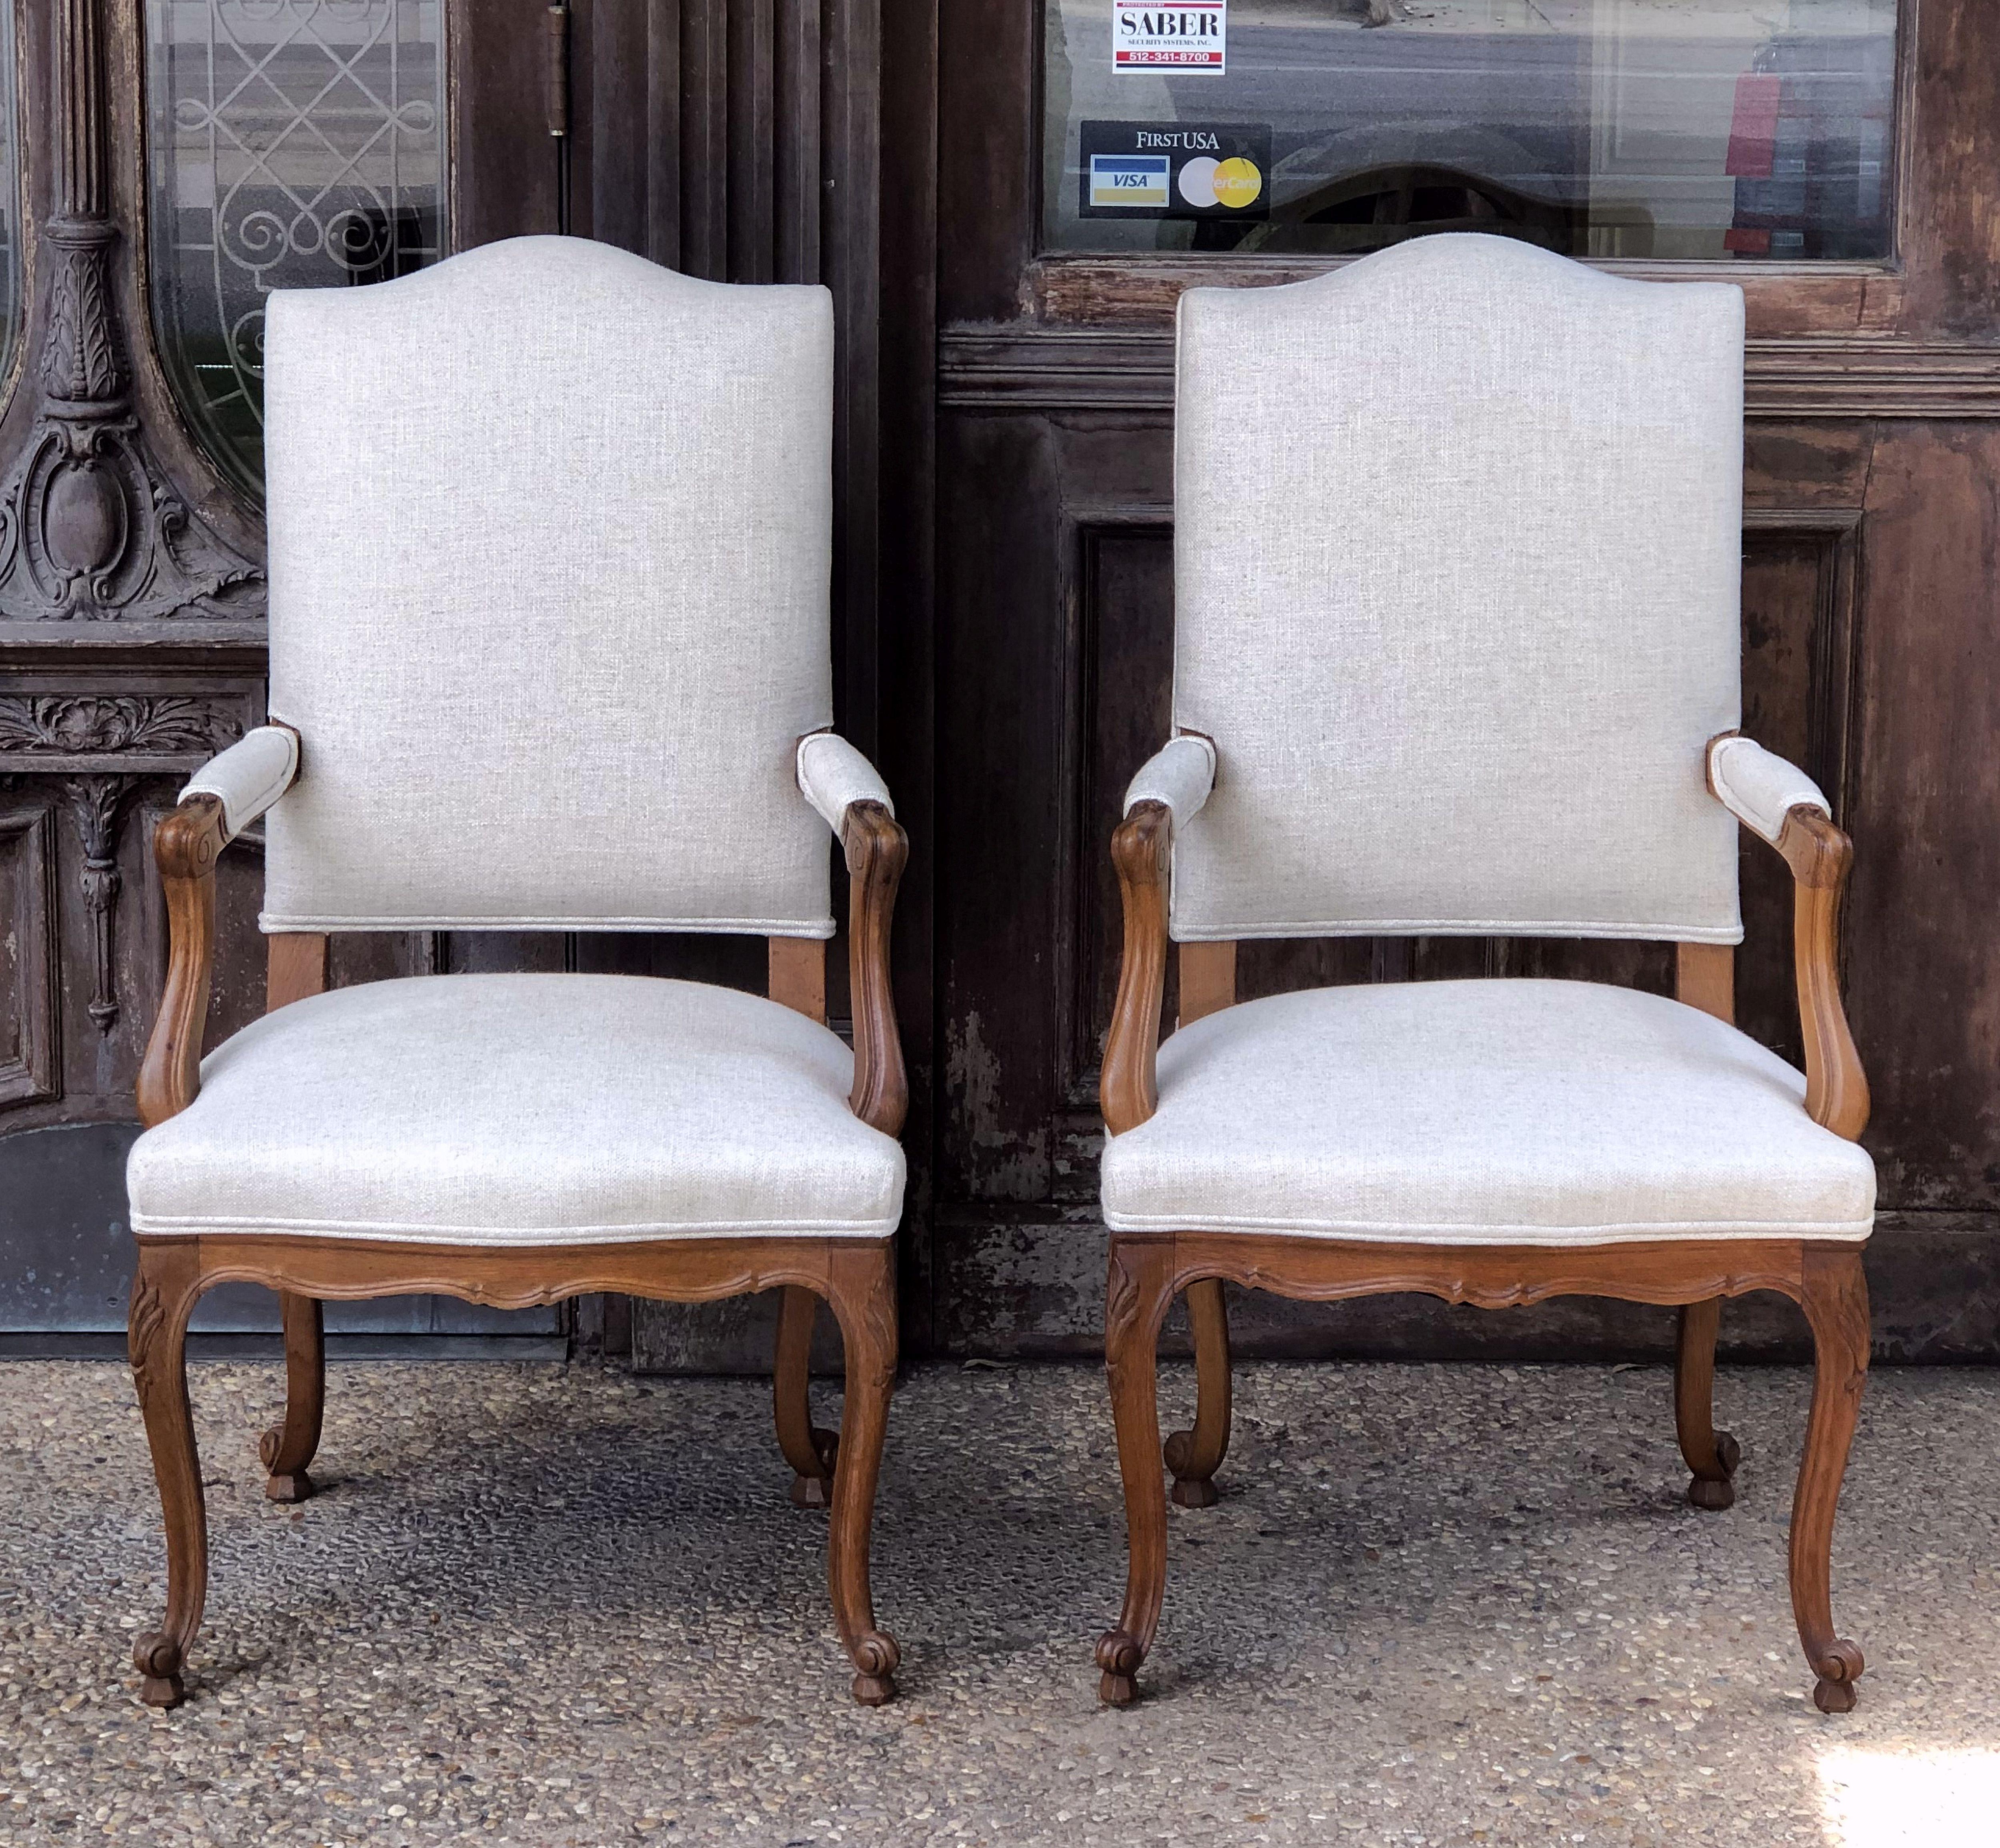 A fine pair of French carver or salon chairs with carved detail to frames, on raised cabriole legs, circa 1900.
With comfortable seats re-upholstered in plain linen fabric.

Dimensions: H 42 1/2 inches x W 23 1/2 inches x D 22 1/2 inches x Seat H